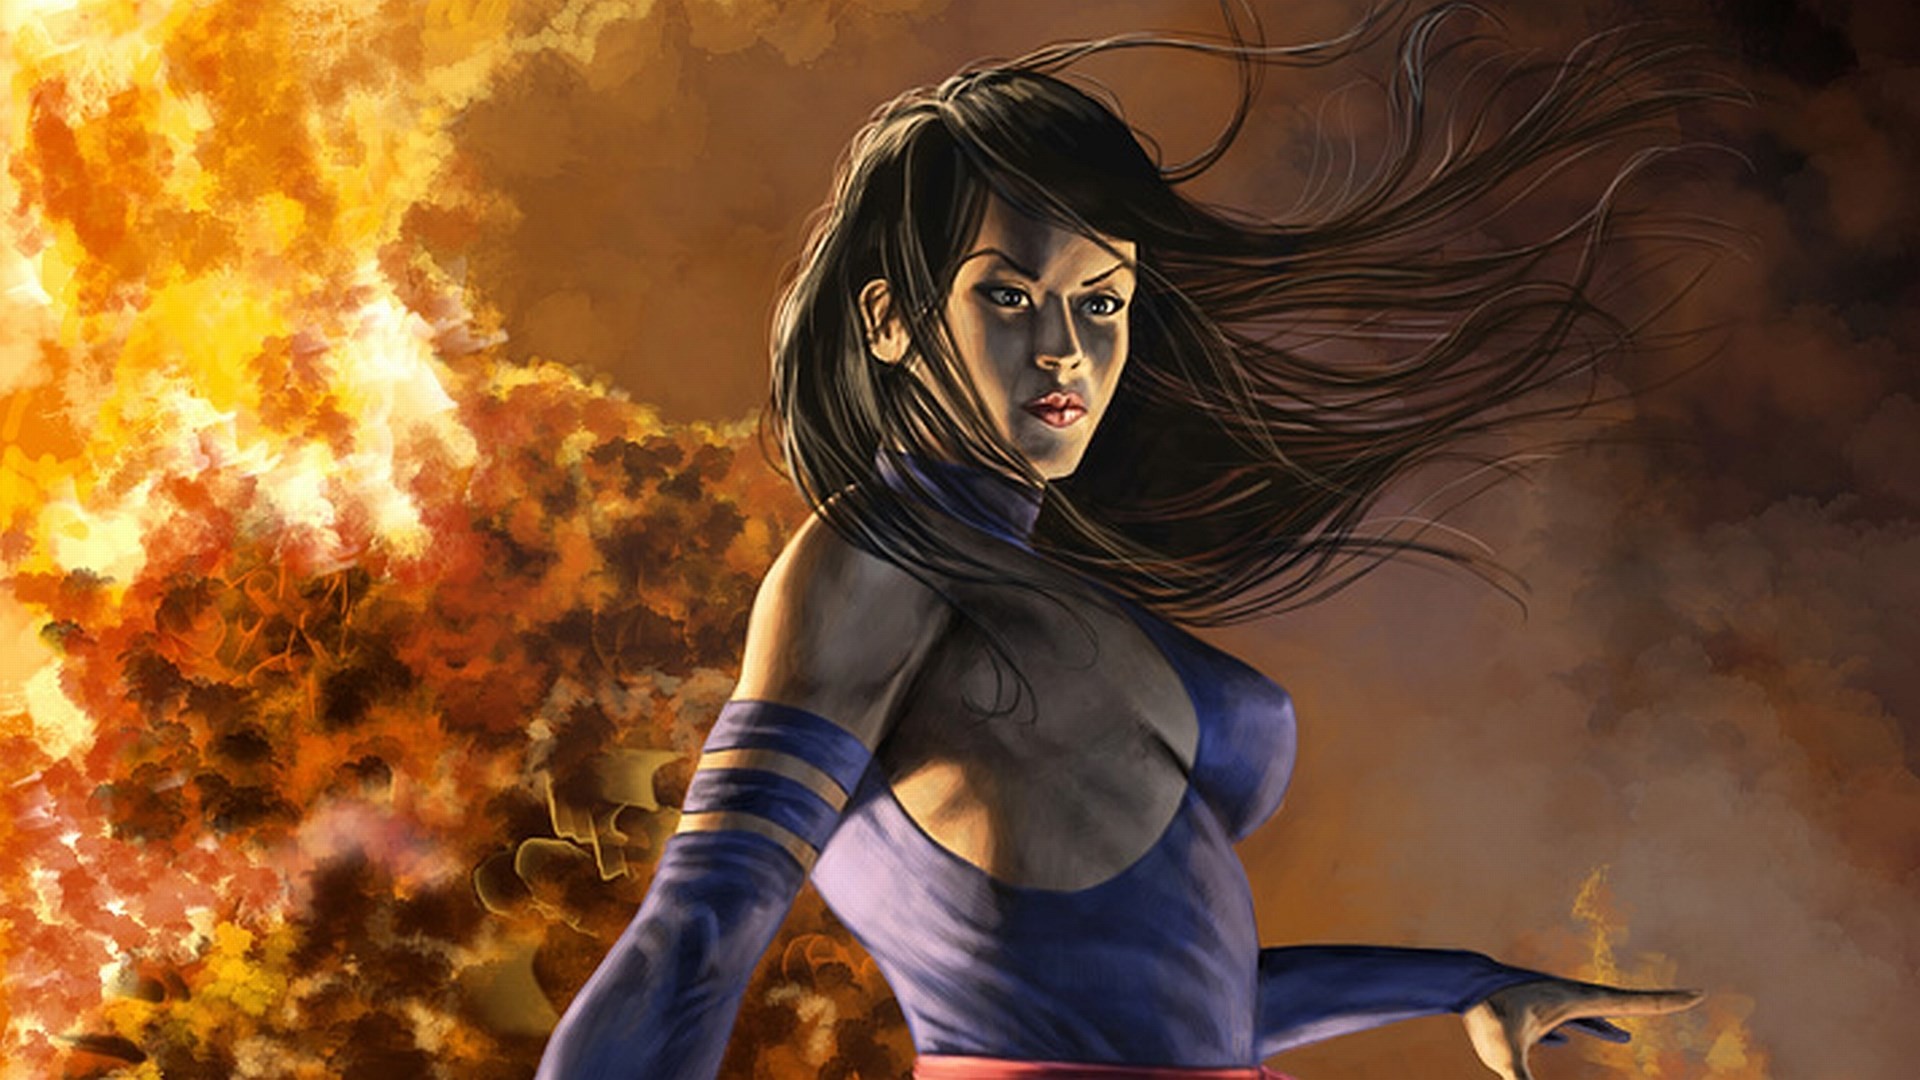 1920x1080 psylocke pic: Wallpapers Collection by Tyrell Mason (2017-03-15)